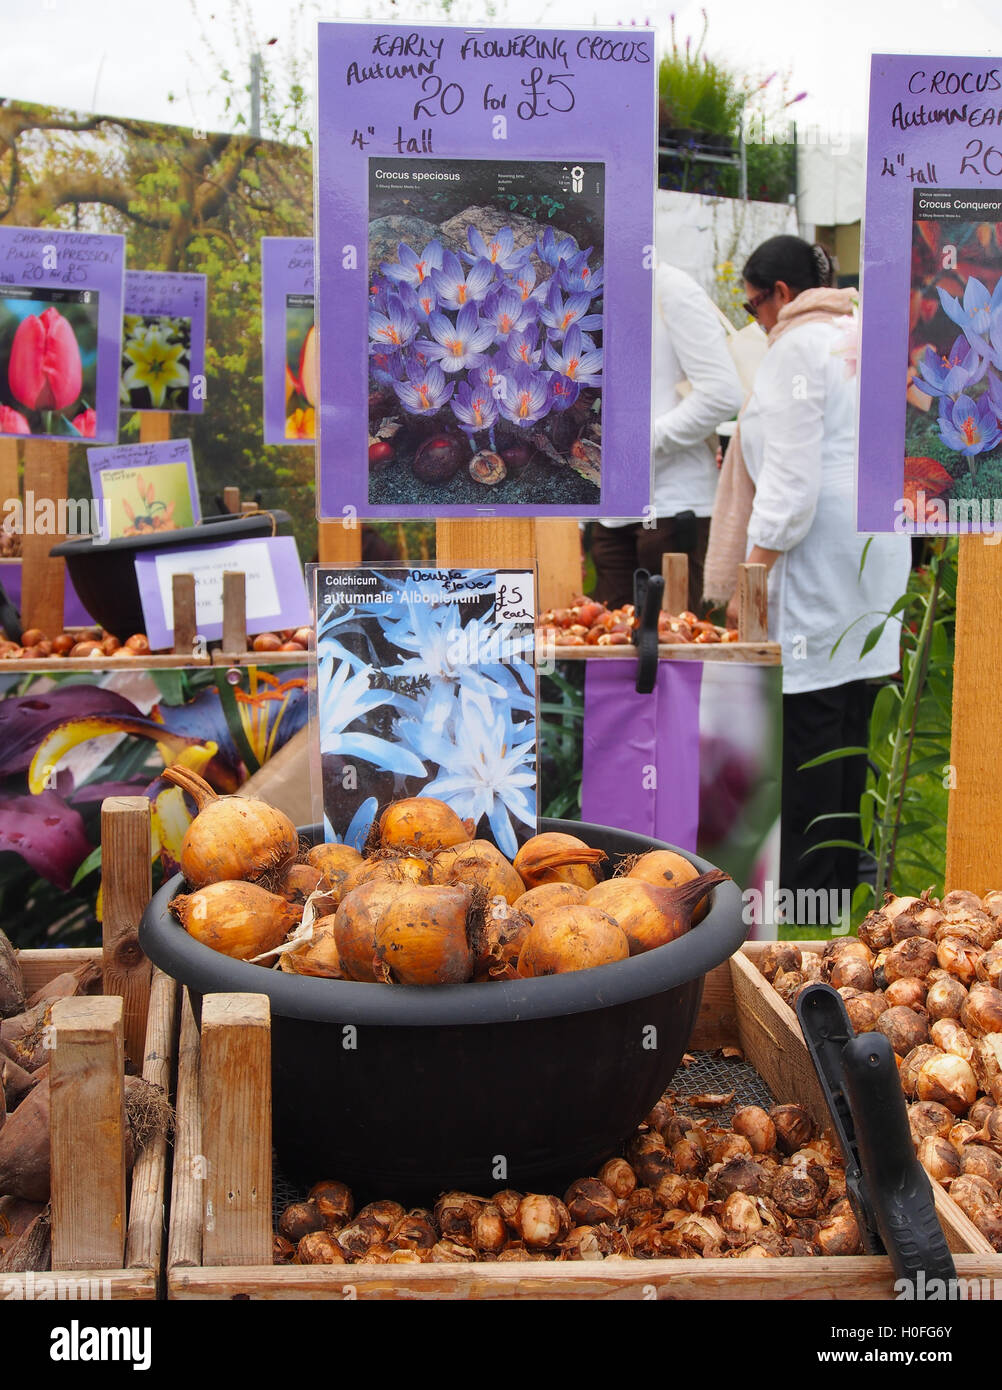 Display of bulbs at the Tatton Park RHS Flower Show 2016, with early flowering crocus + colchicum autumnale alboplenum bulbs. Stock Photo